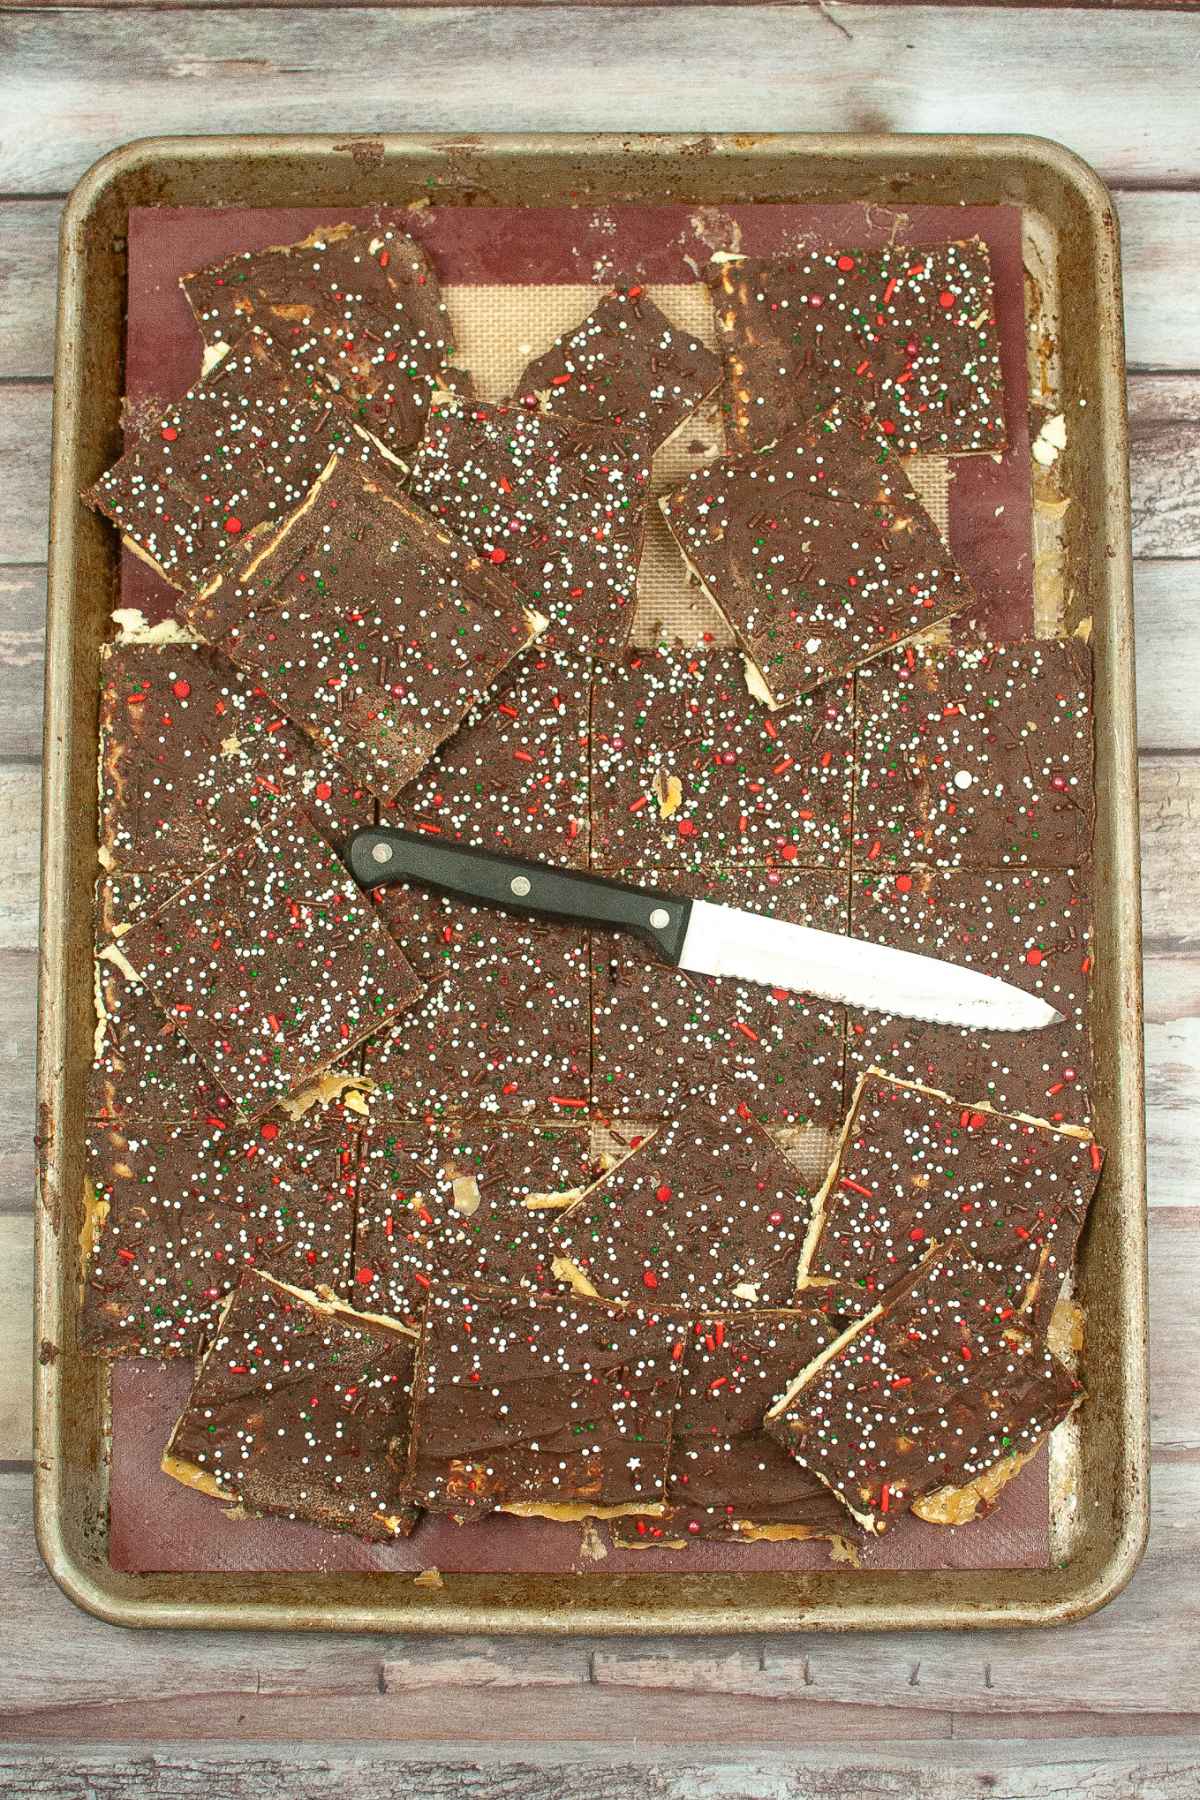 Christmas Crack that has been cut into pieces on the jelly roll pan.